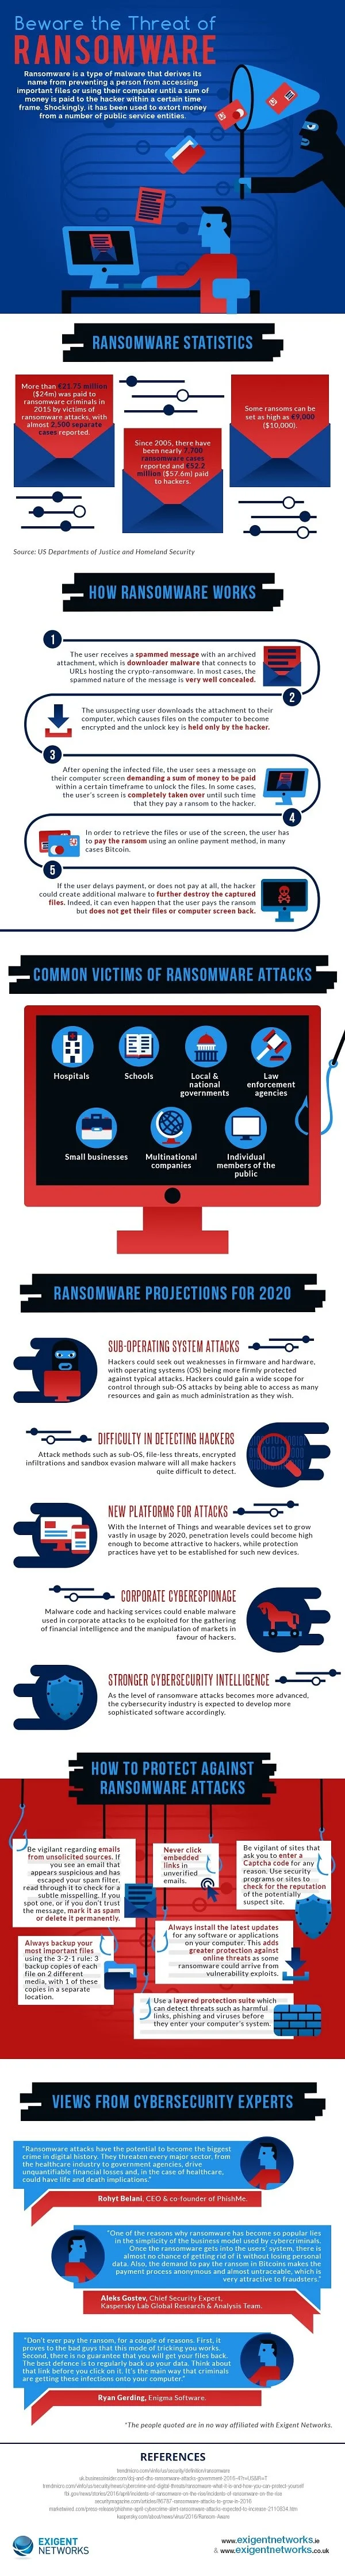 Beware the Threat of Ransomware - #Infographic